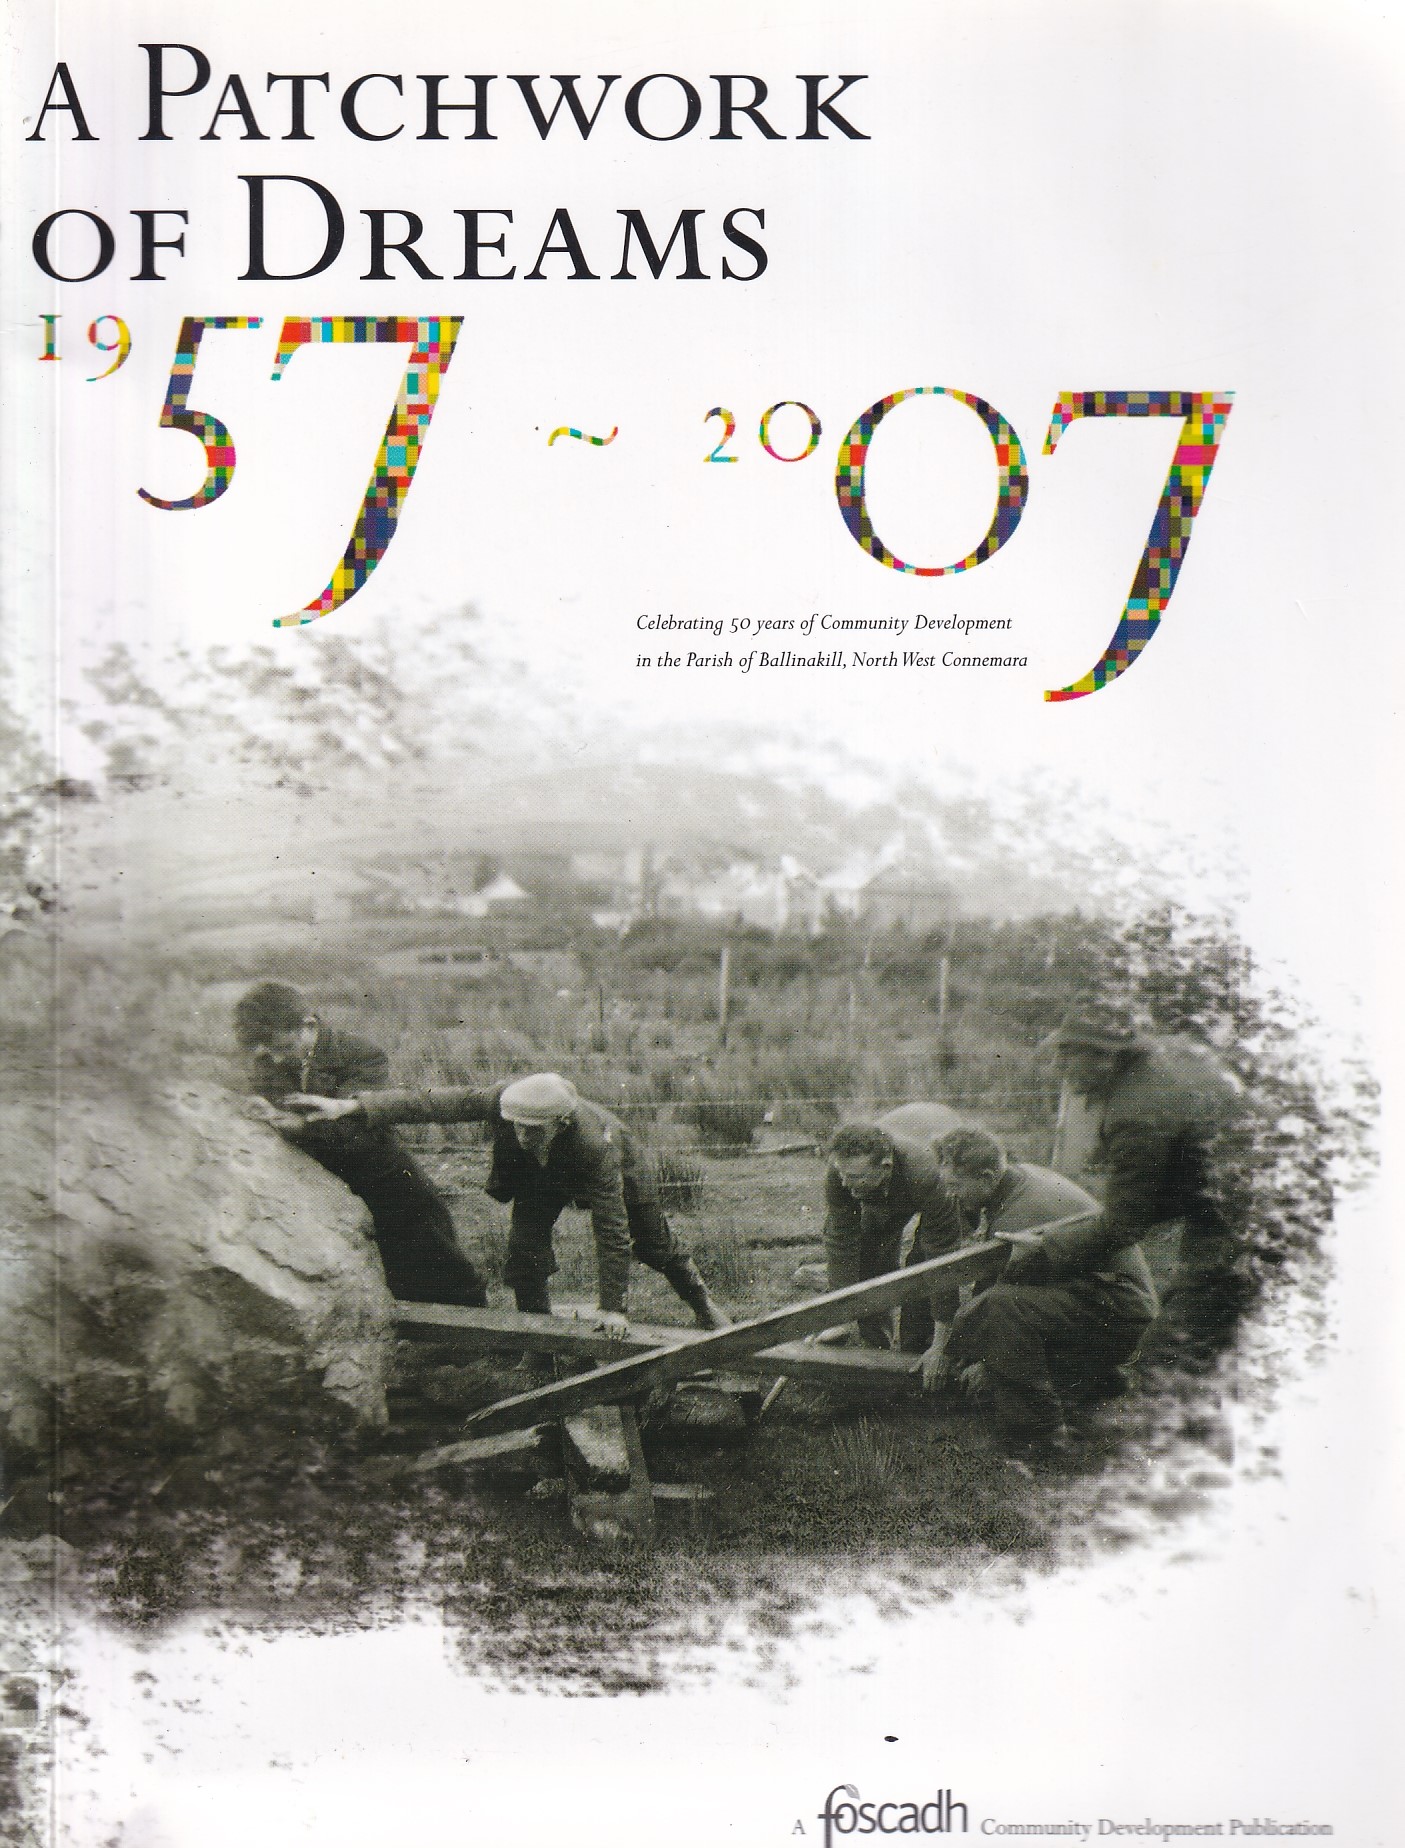 A Patchwork of Dreams 1957 – 2007 | Michael O'Neill (ed.) | Charlie Byrne's